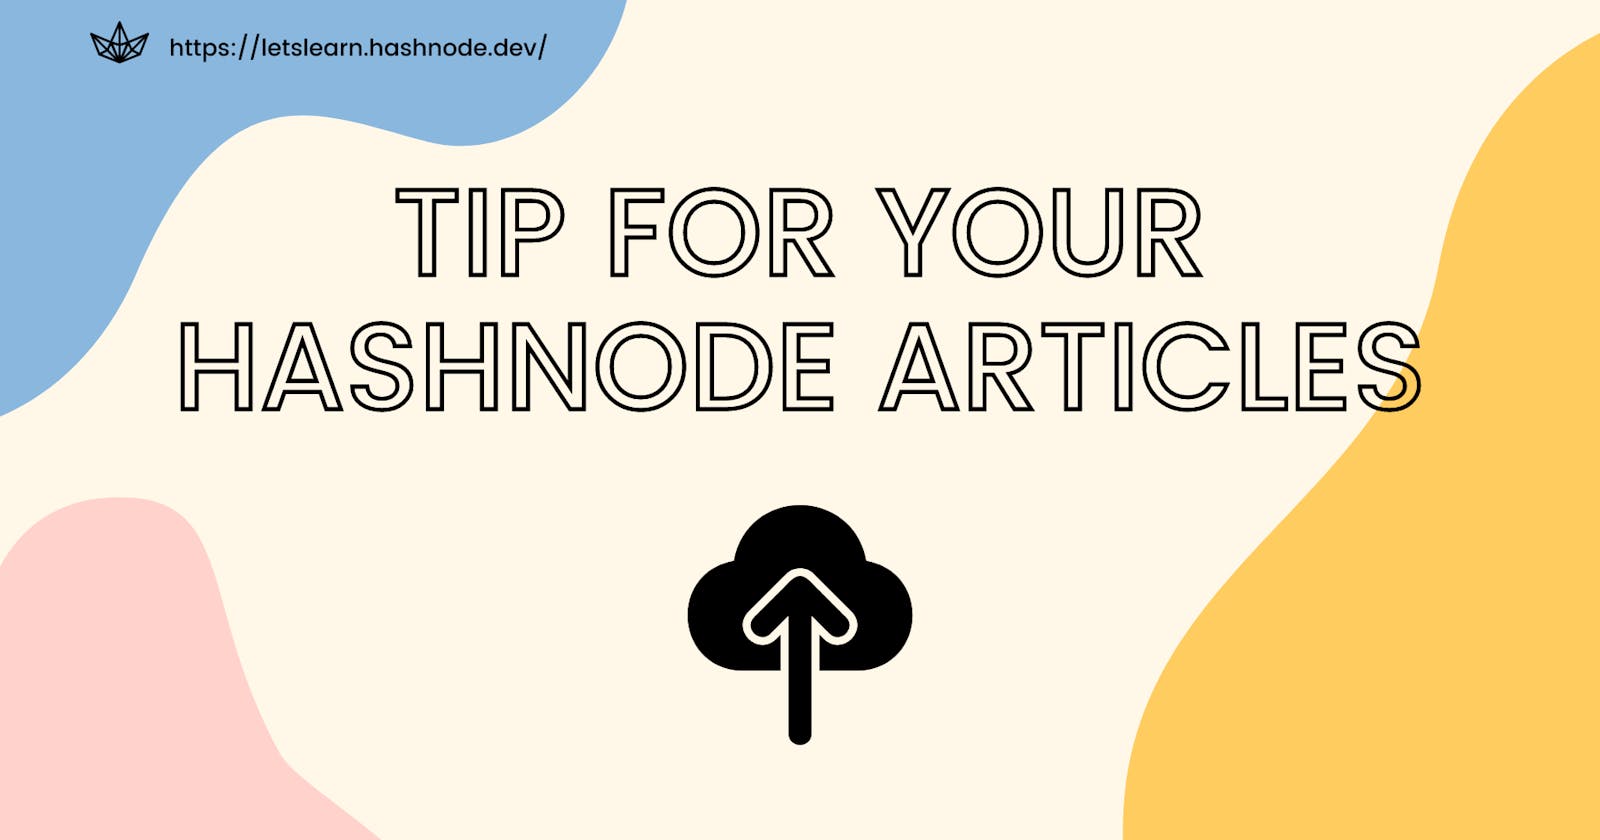 Tip for your hashnode articles